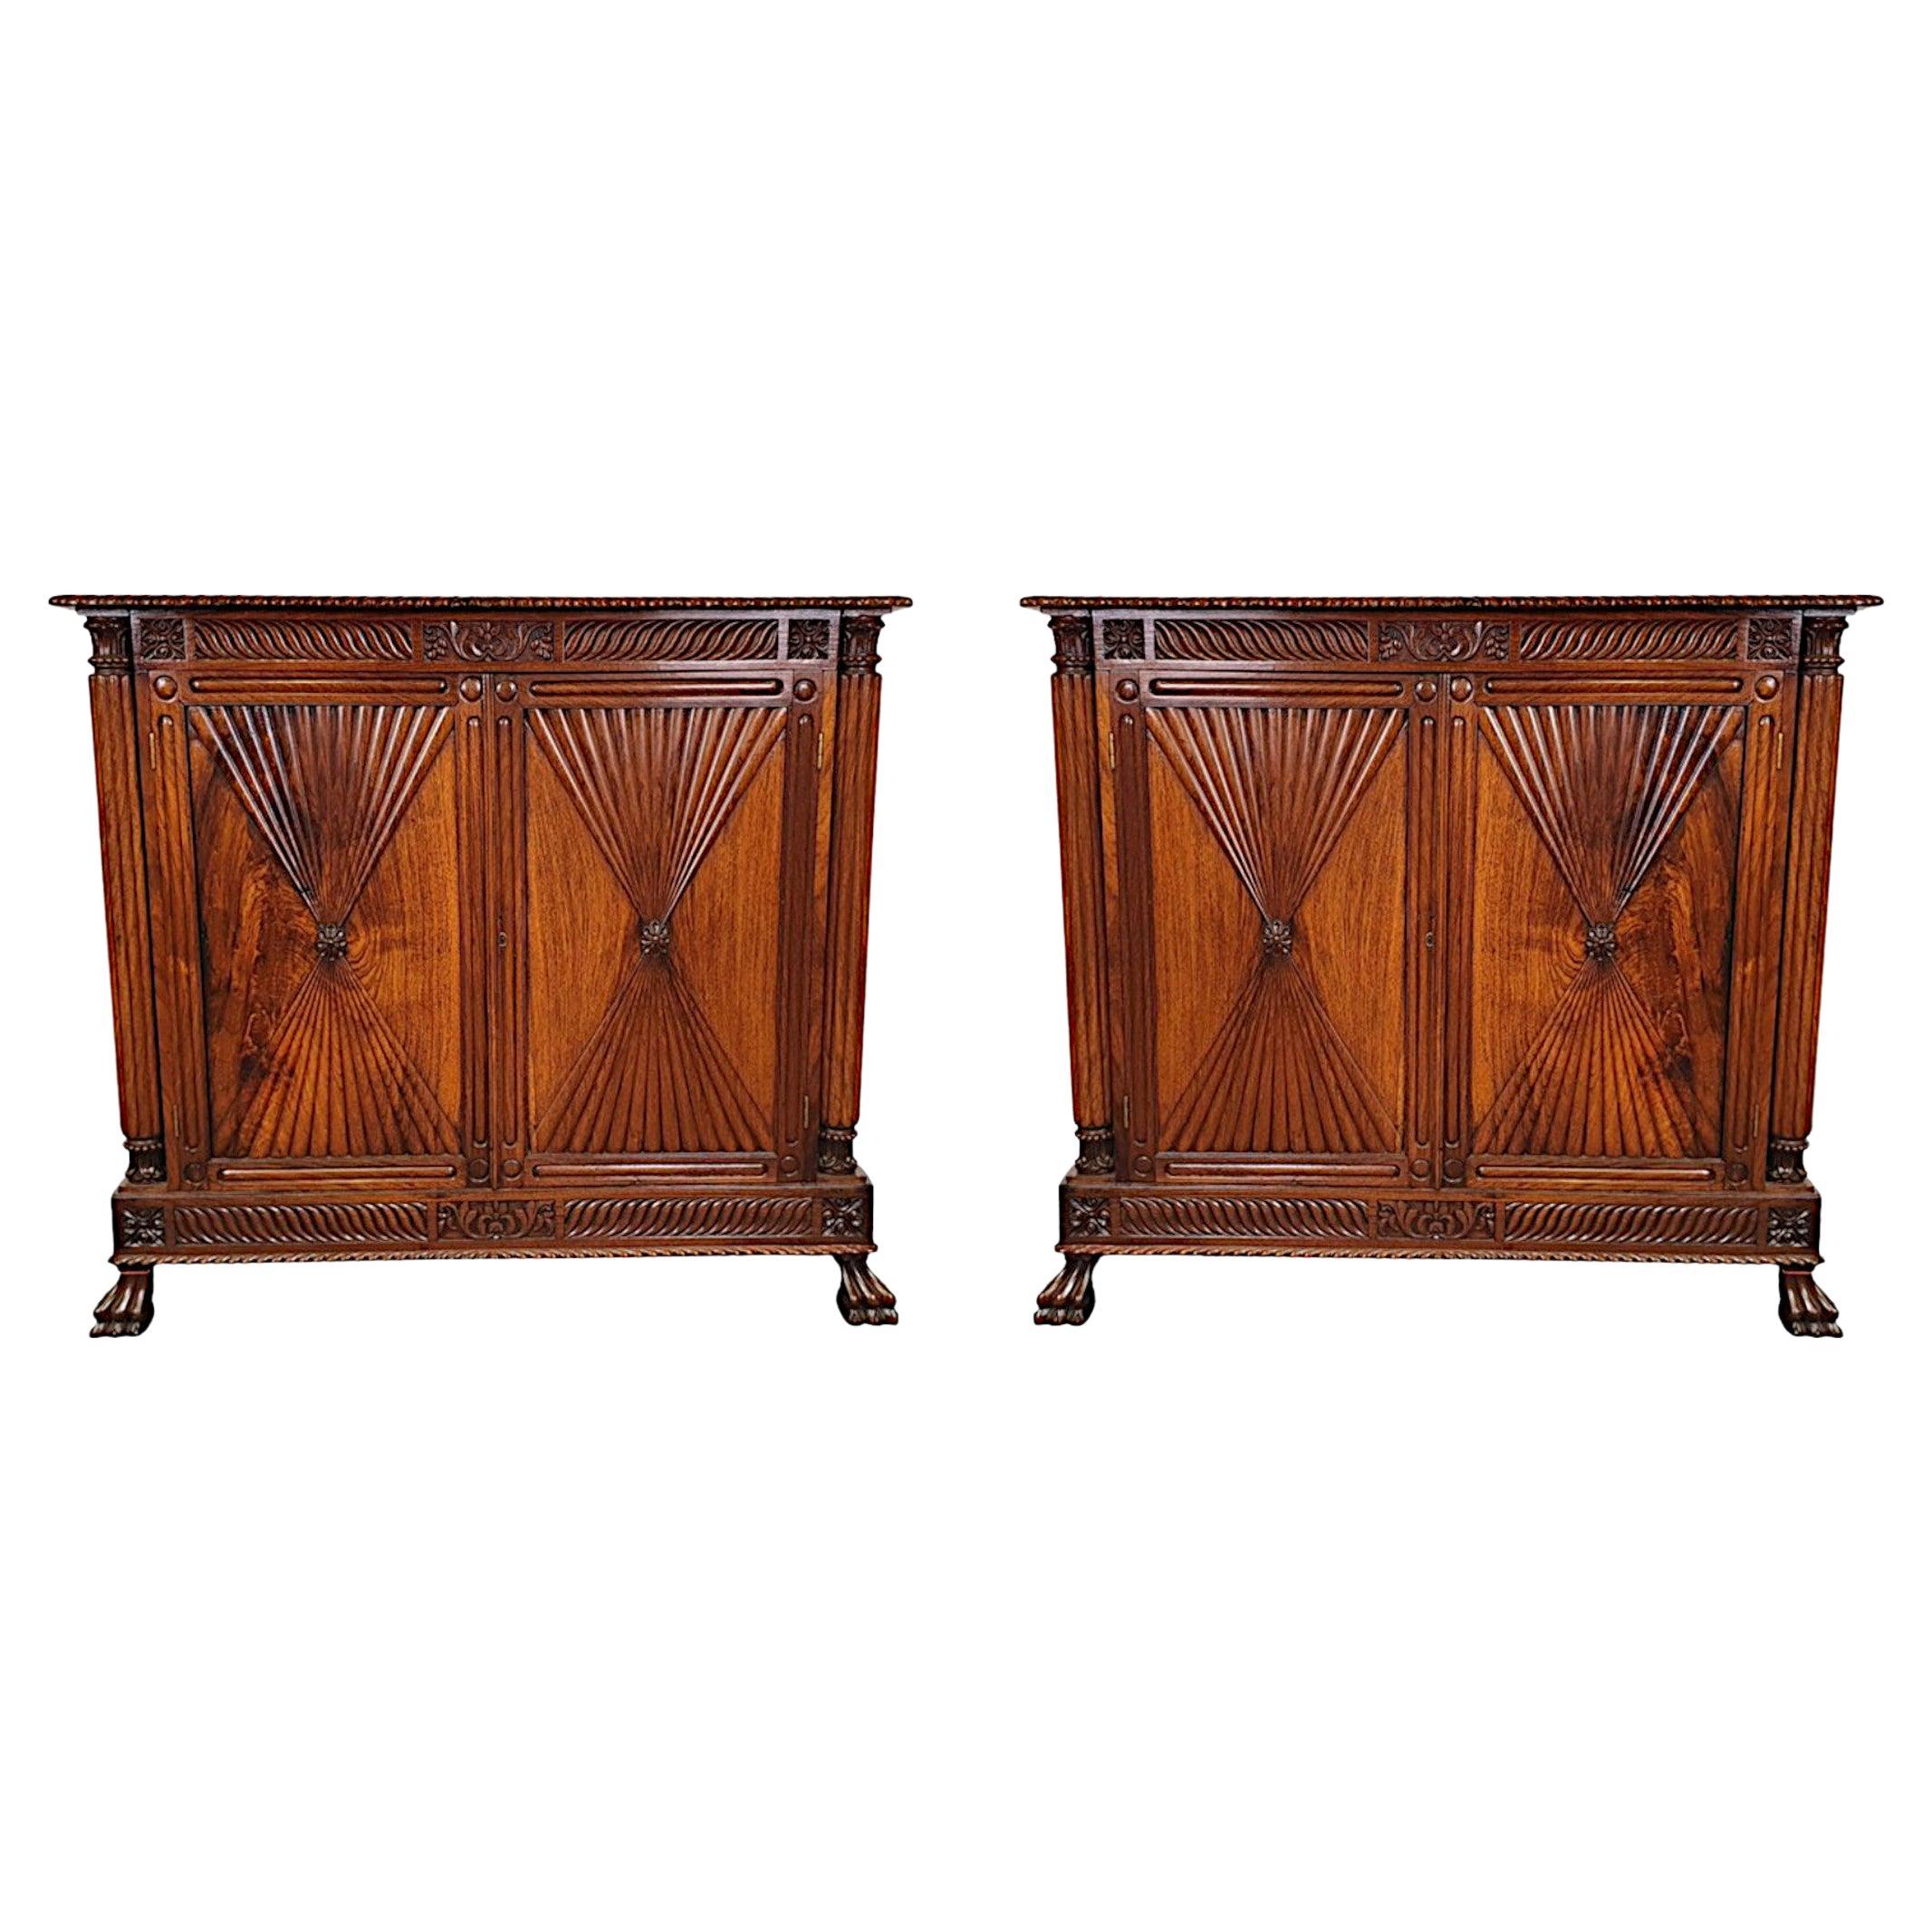 Rare Pair of 19th Century Fruitwood Side Cabinets